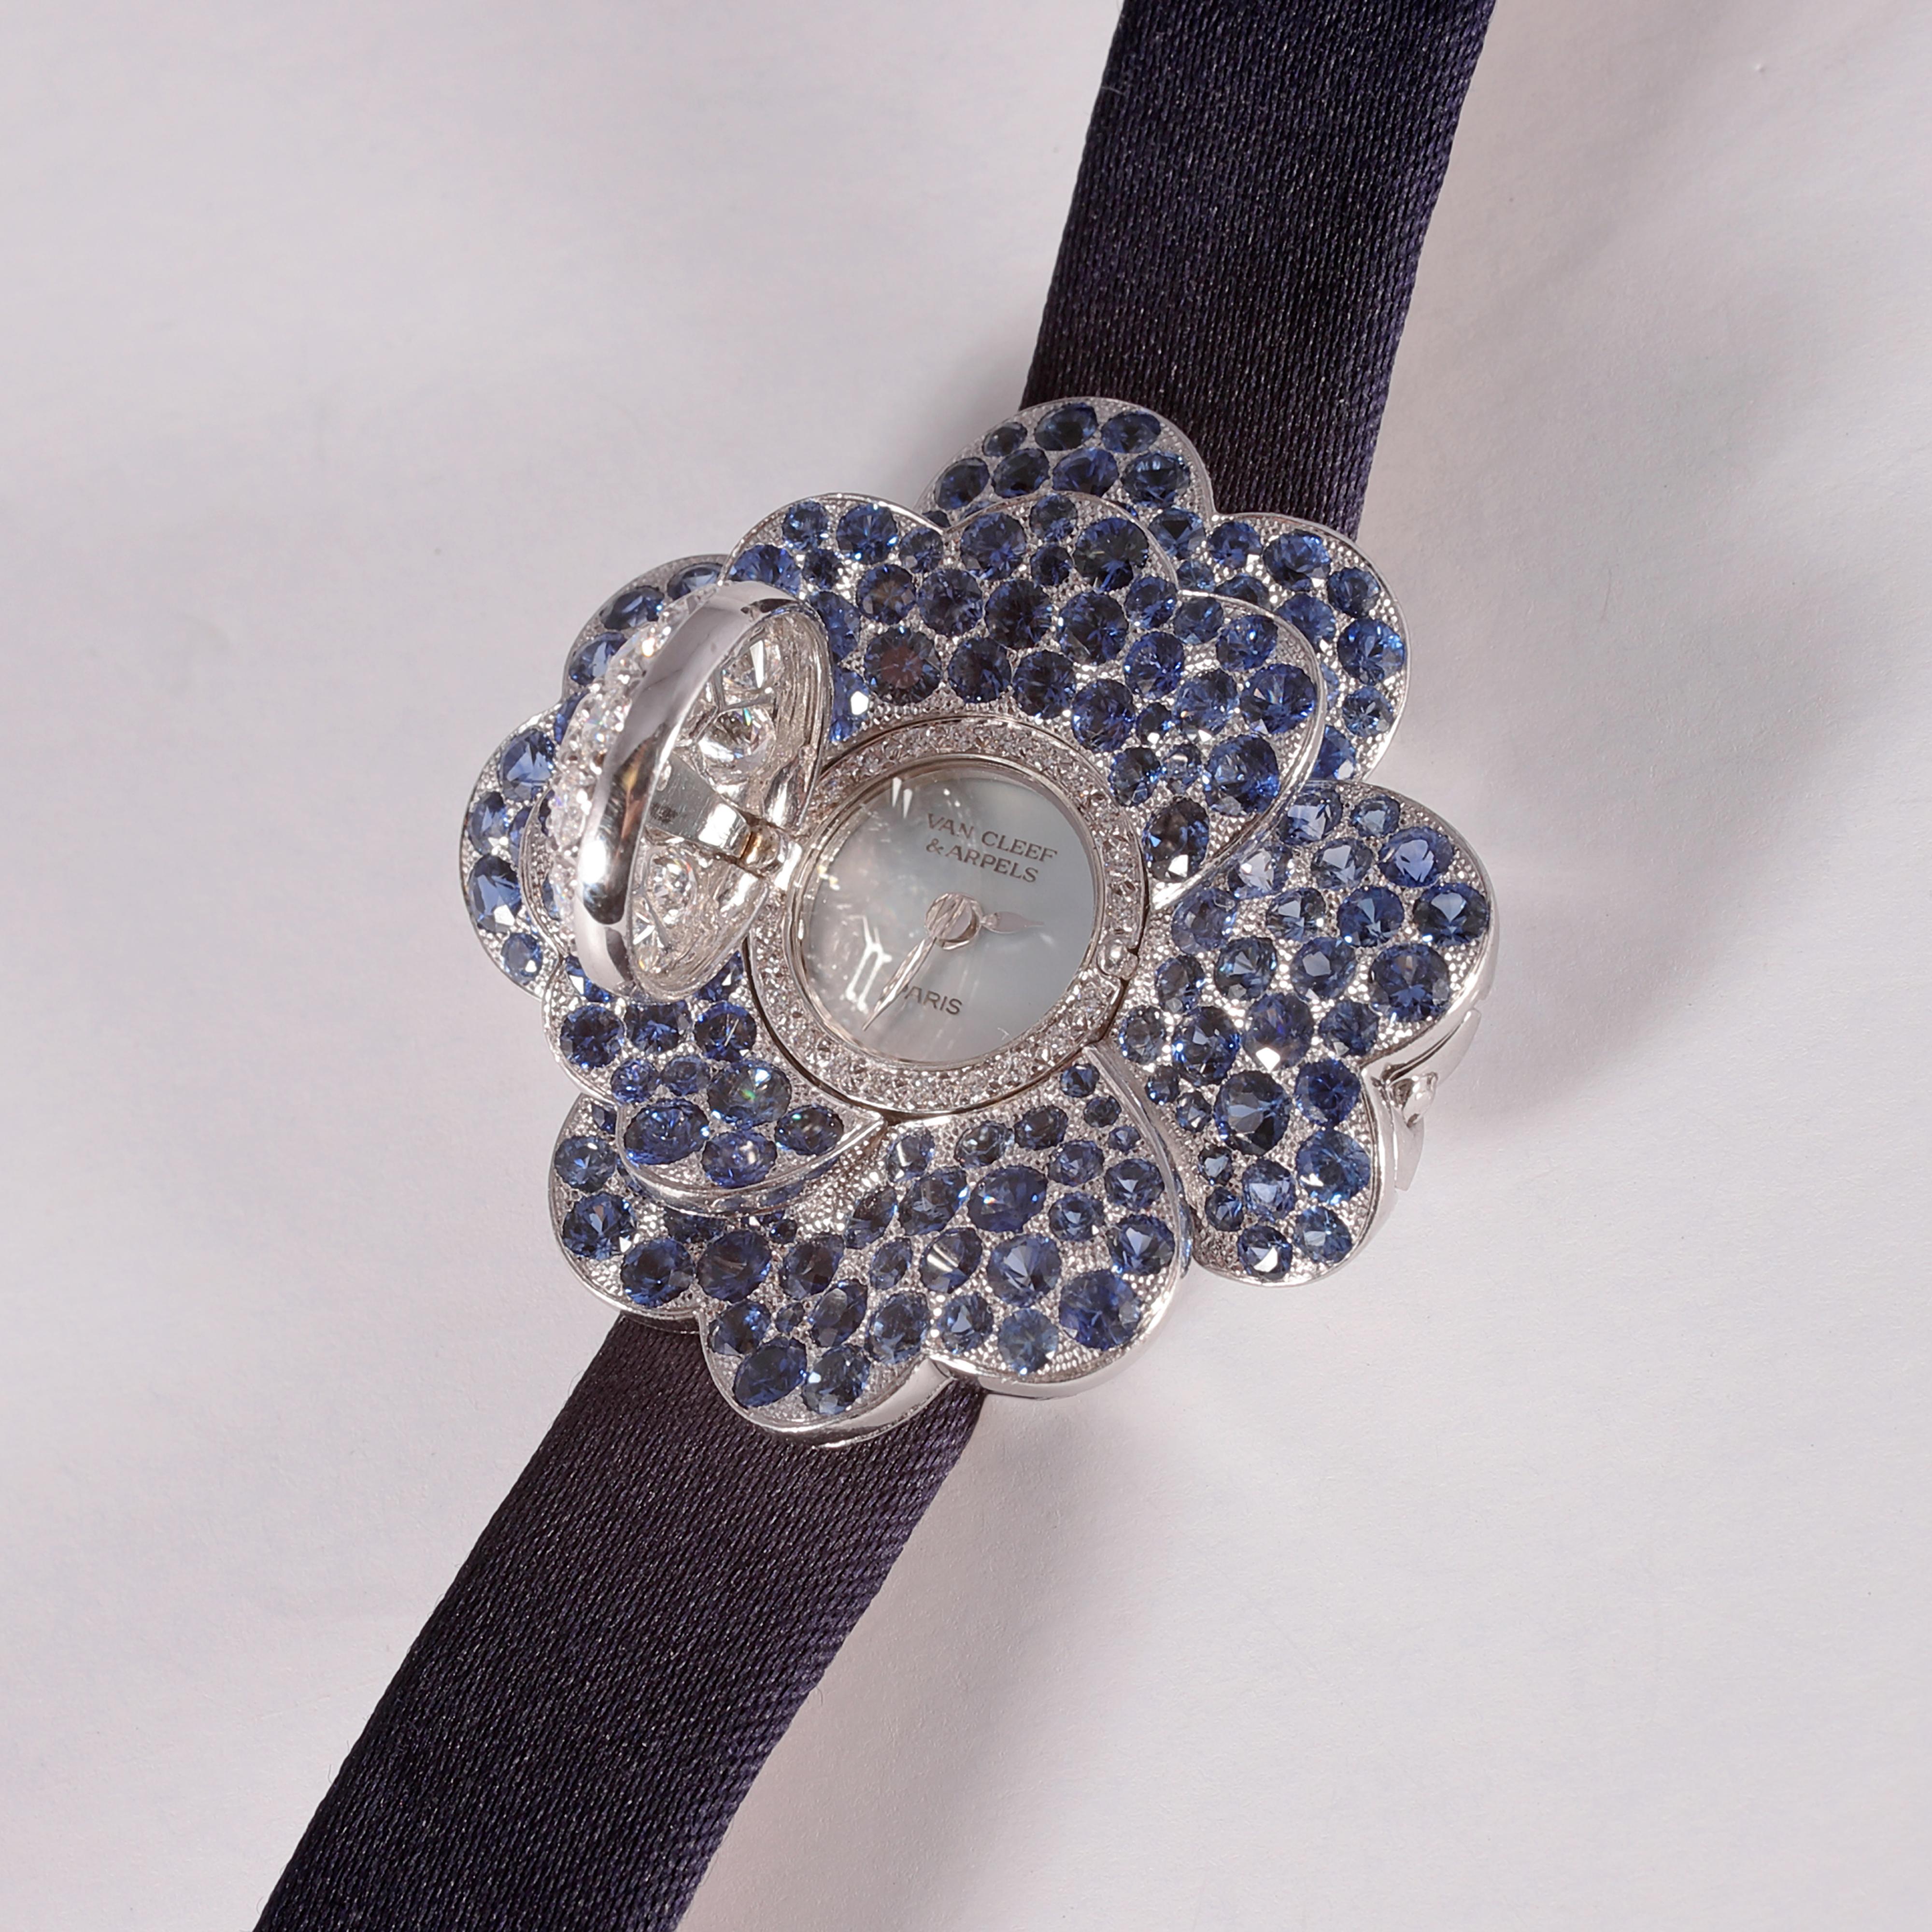 7.06 Carat Blue Sapphire and 3.32 Carat Diamond Van Cleef & Arpels Cosmos Watch In Good Condition For Sale In Dallas, TX